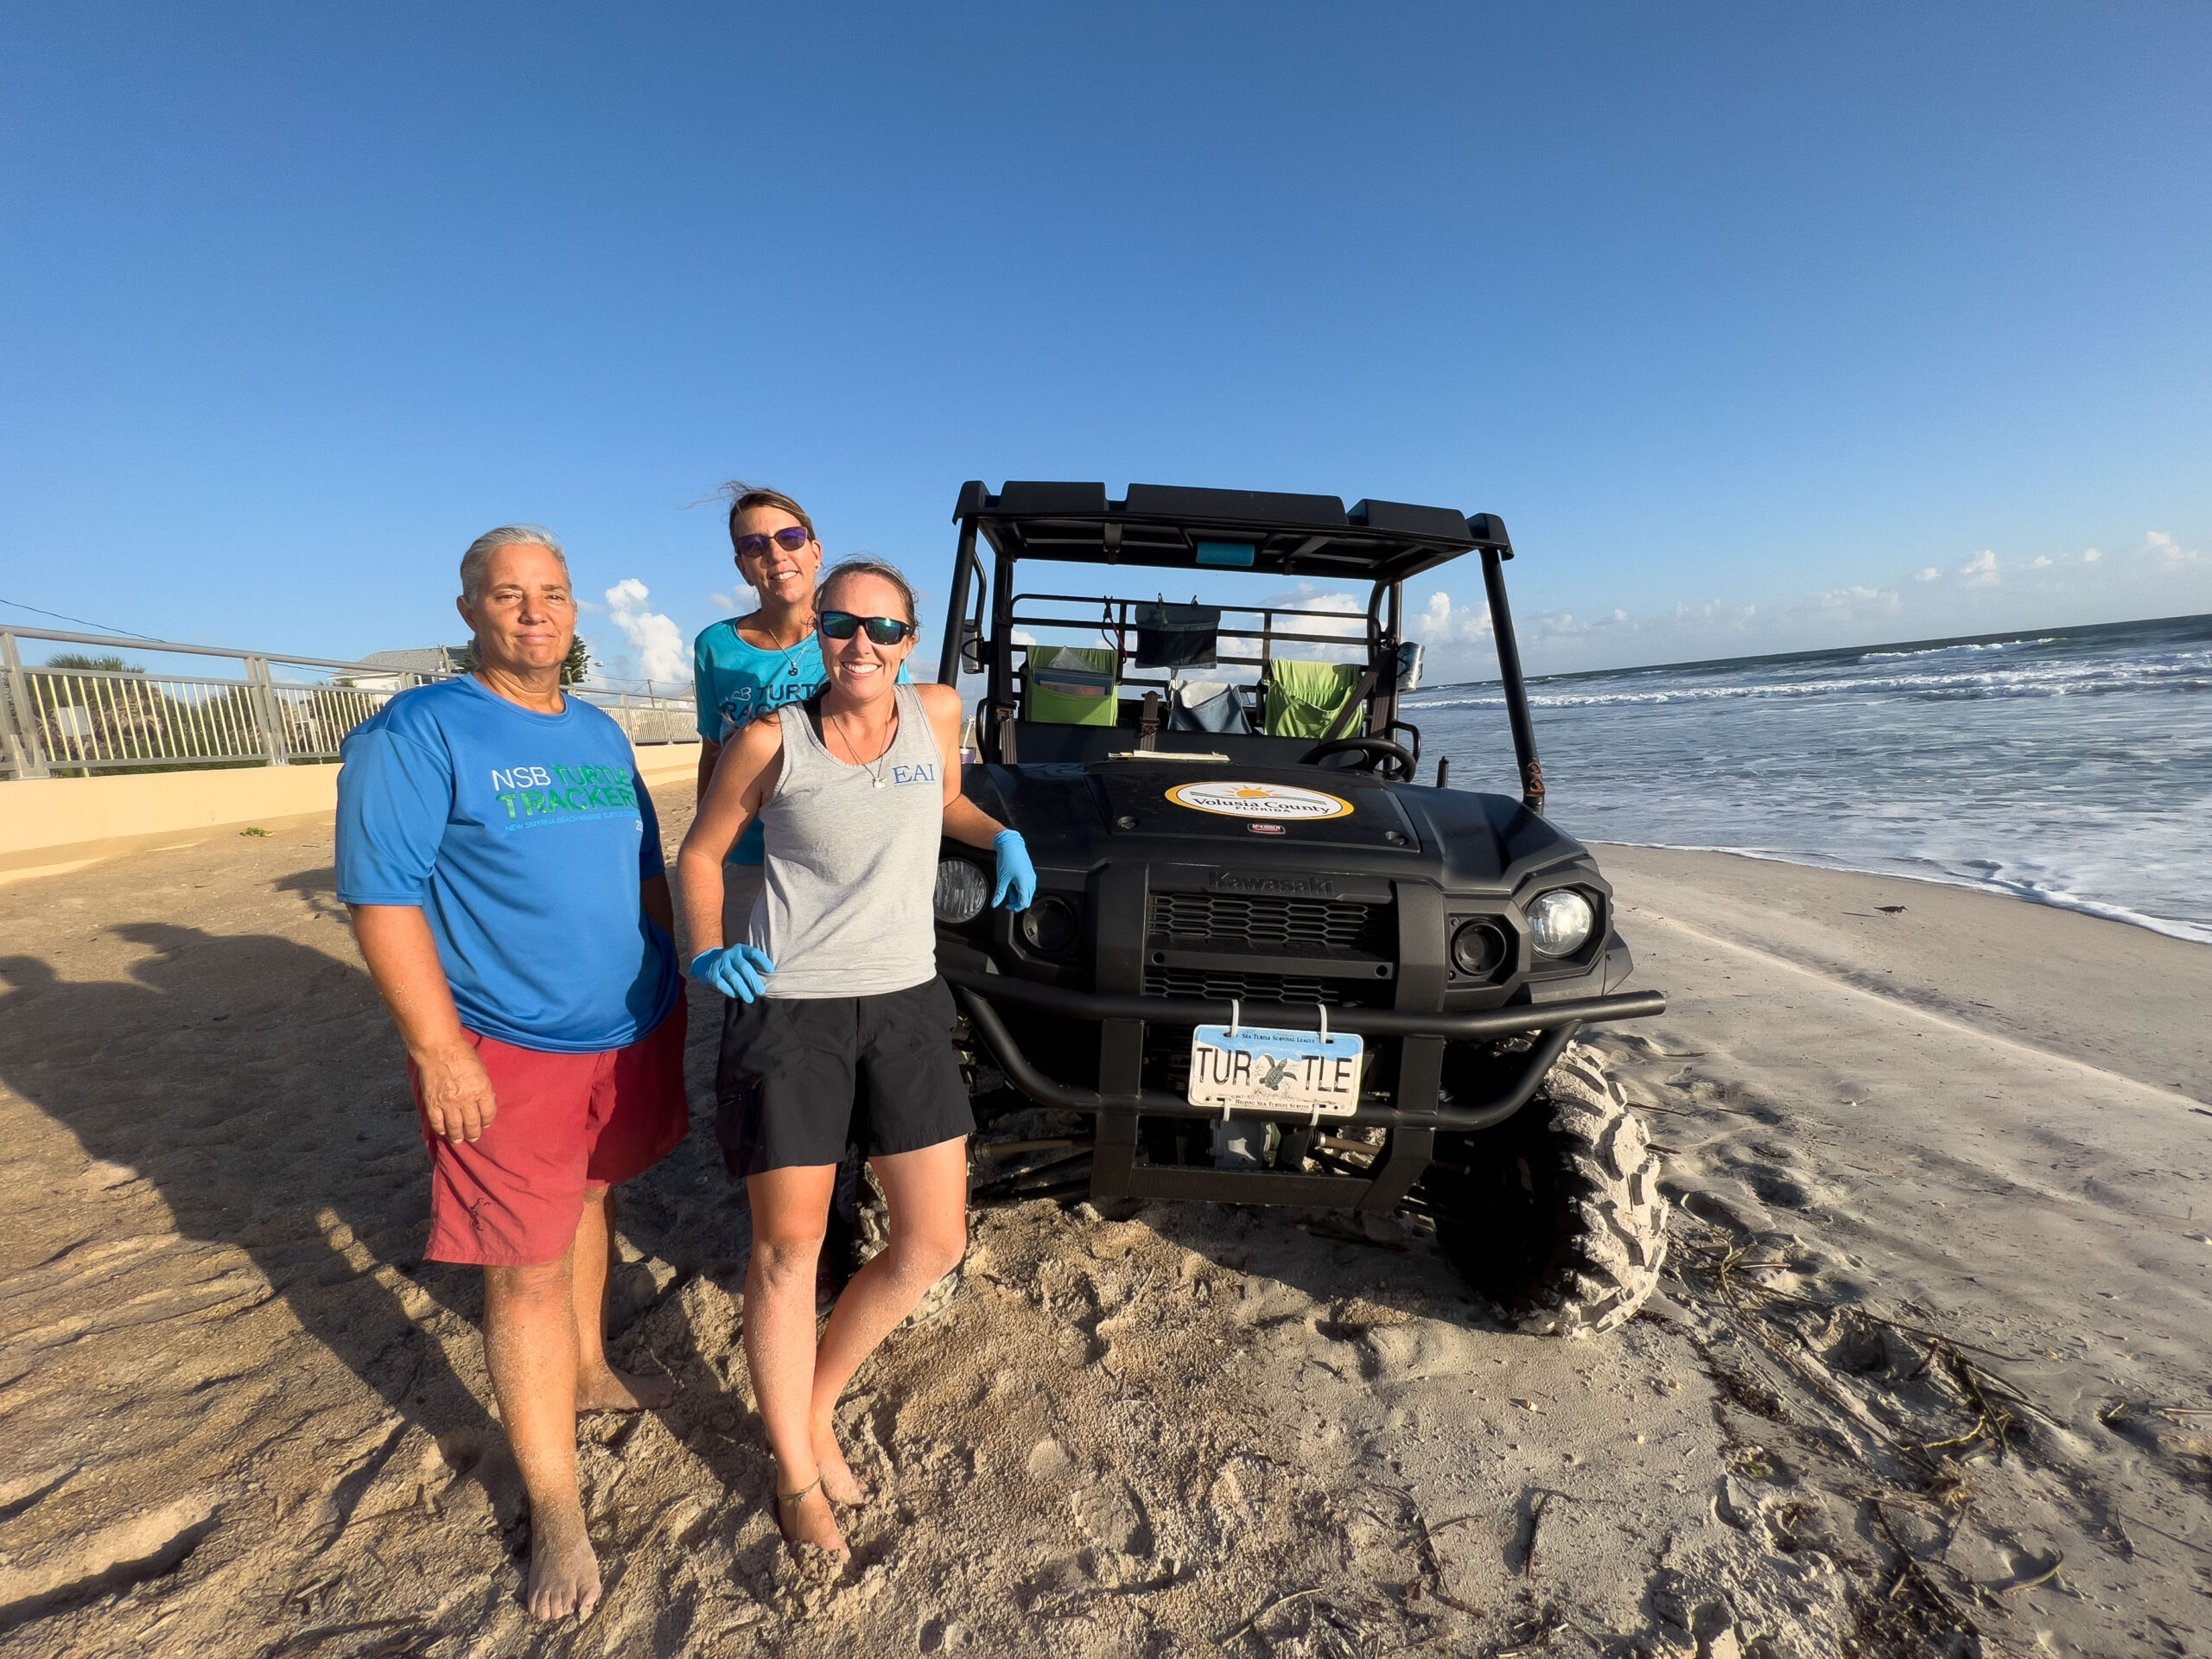 Biologist Jaymie Reneker (right), Jennifer Winters, protected species manager for Volusia County (center), and volunteer Jean Callaghan (left) pose in front of their all-terrain vehicle while on their morning rounds monitoring sea turtle nests in New Smyrna Beach, Florida. (Credit: Jennifer Taylor)